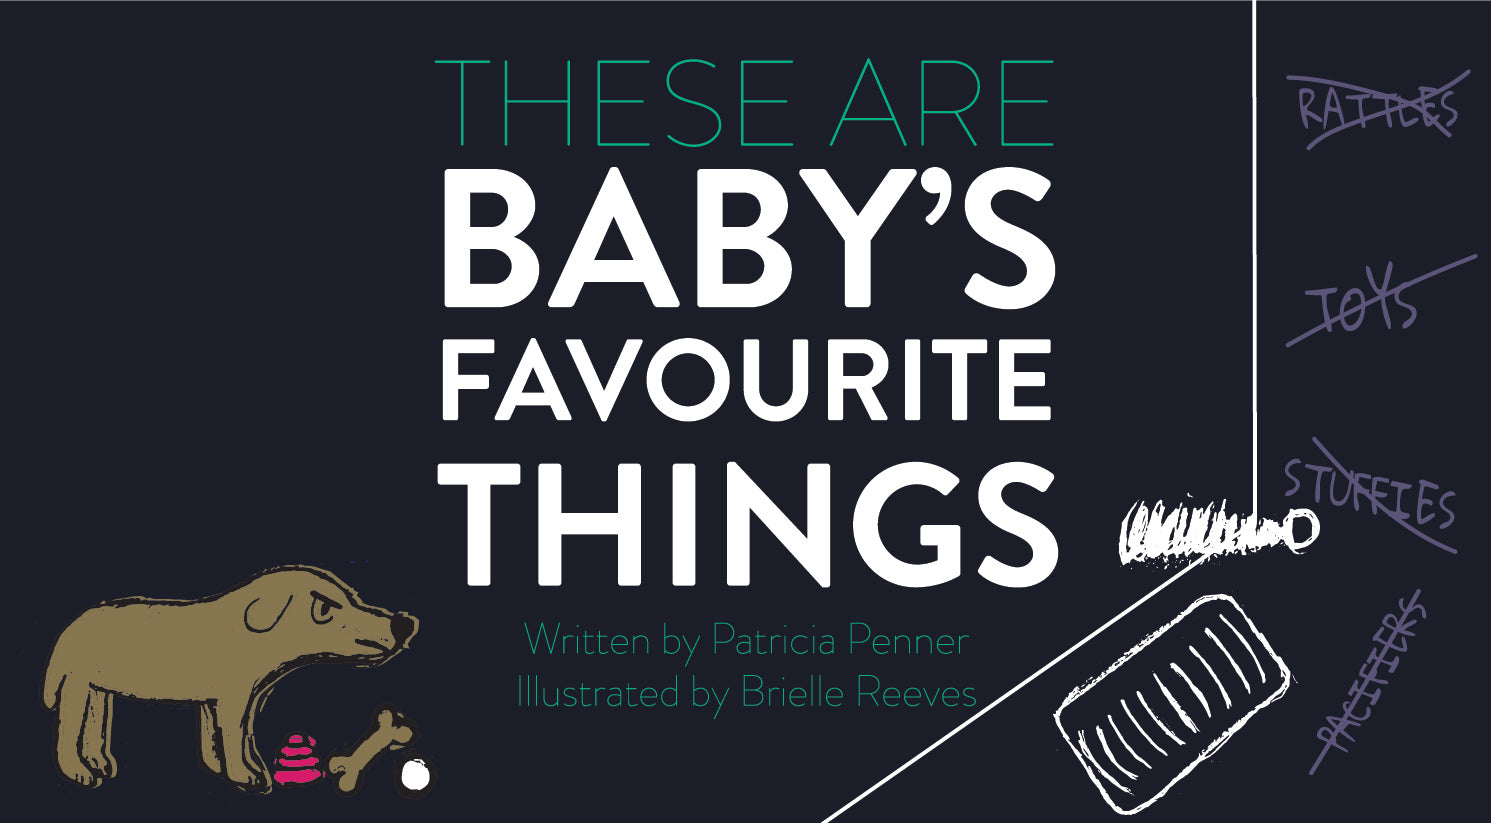 Book Club Feature: These are Baby's Favourite Things